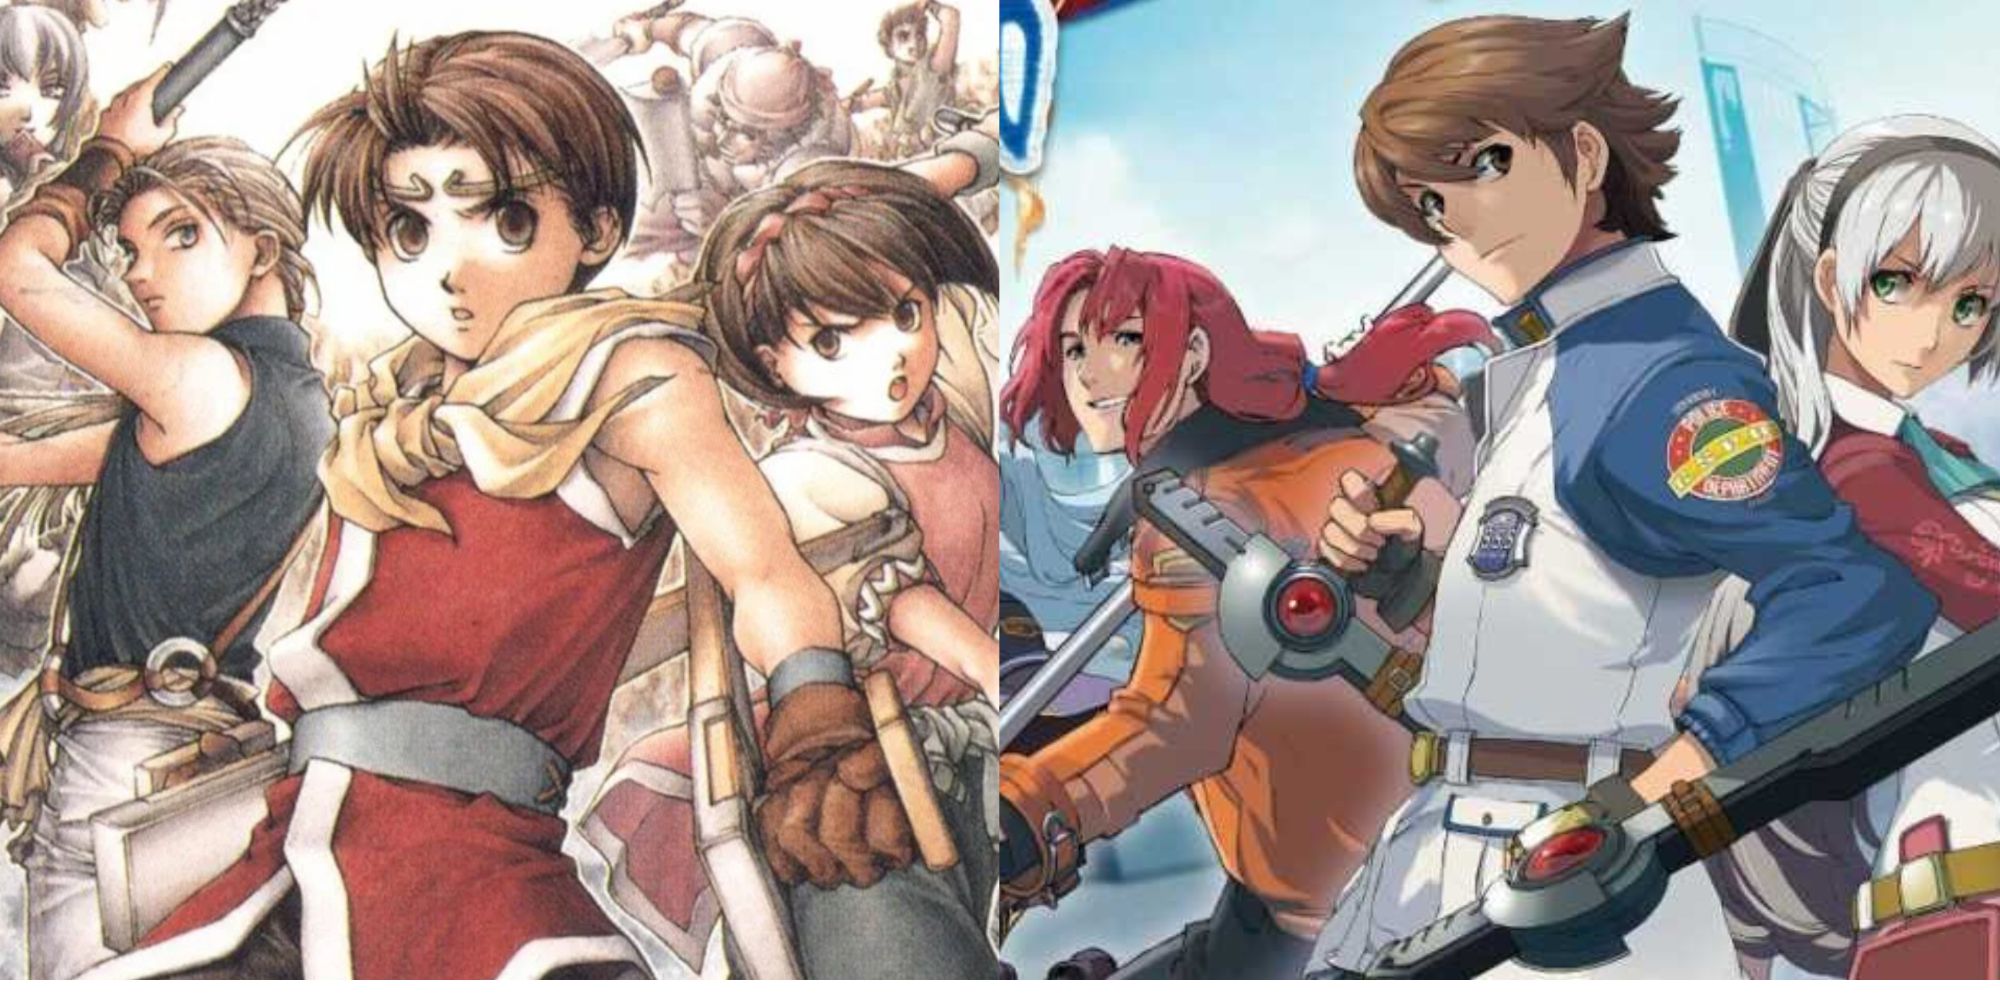 Suikoden Protagonist, Nanami, and Joei - Trails from Zero Lloyd and co